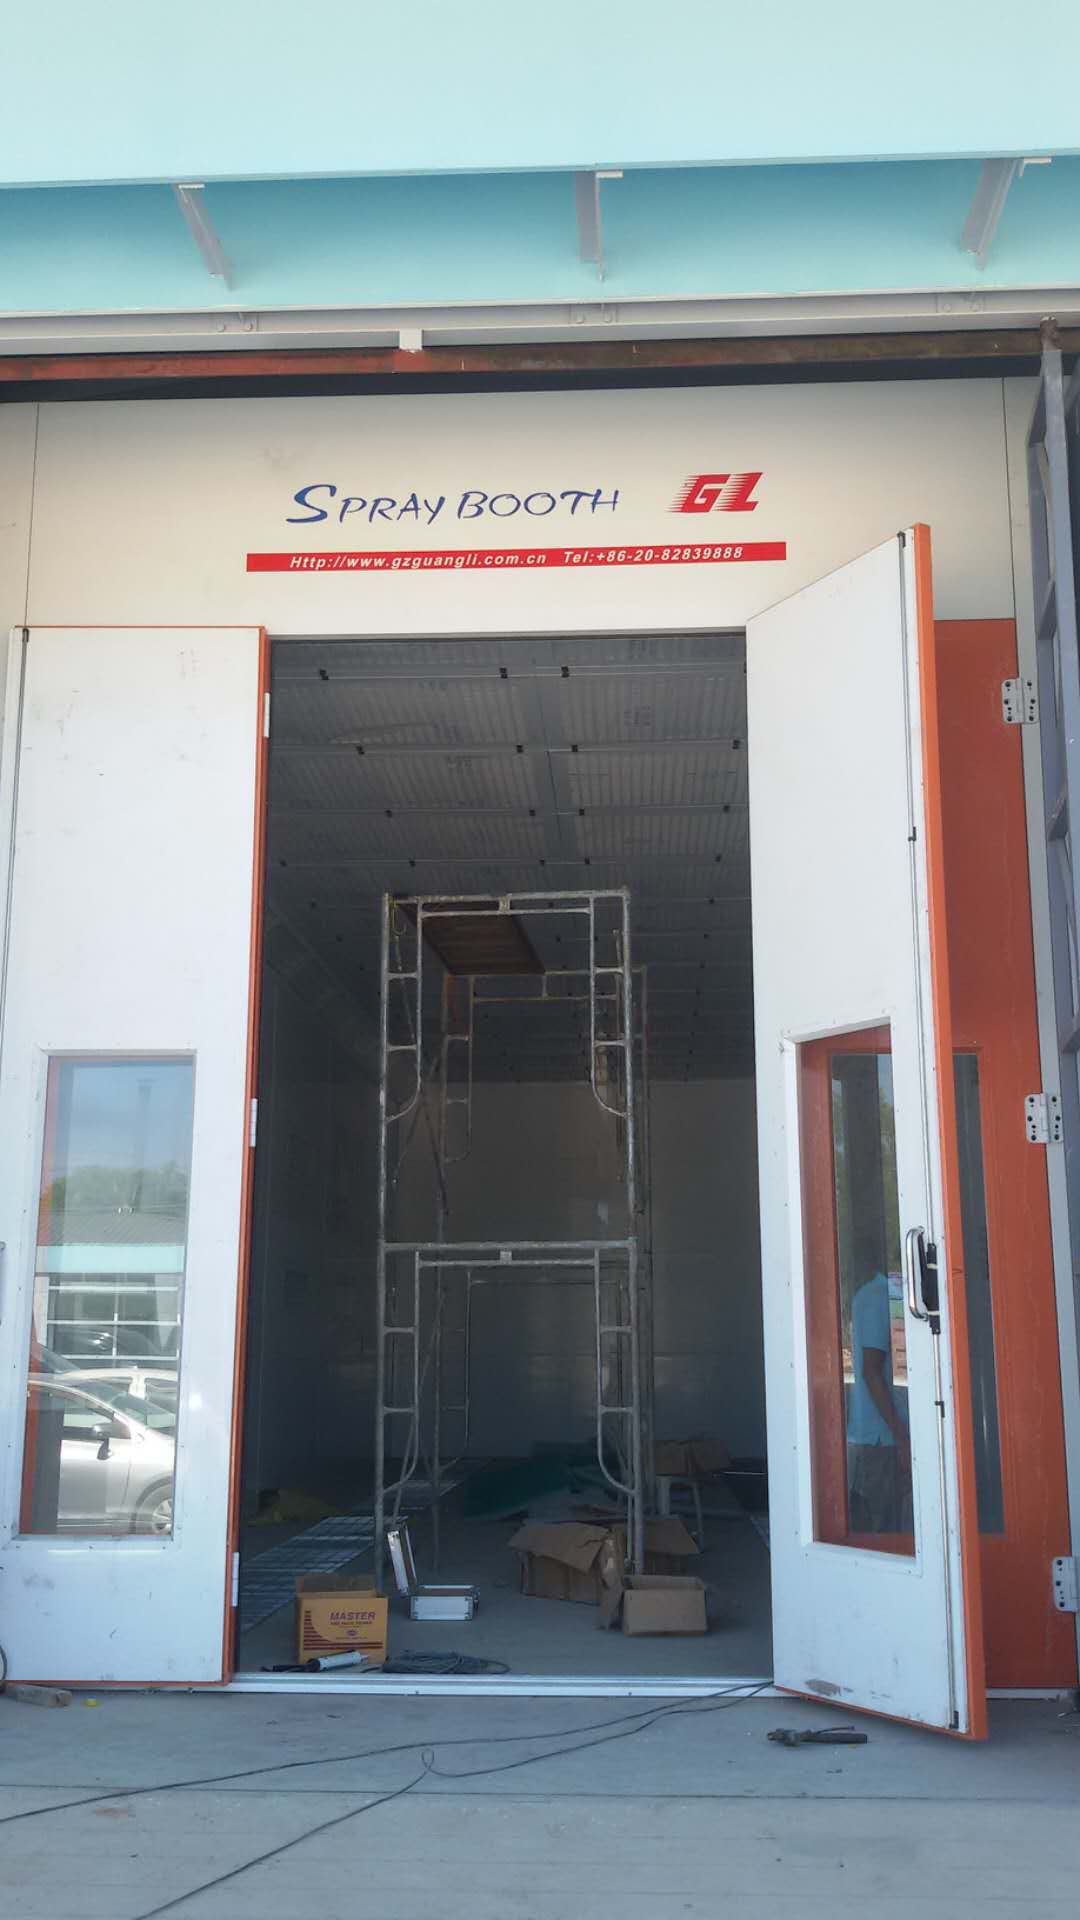 Large vehicle Spray booth